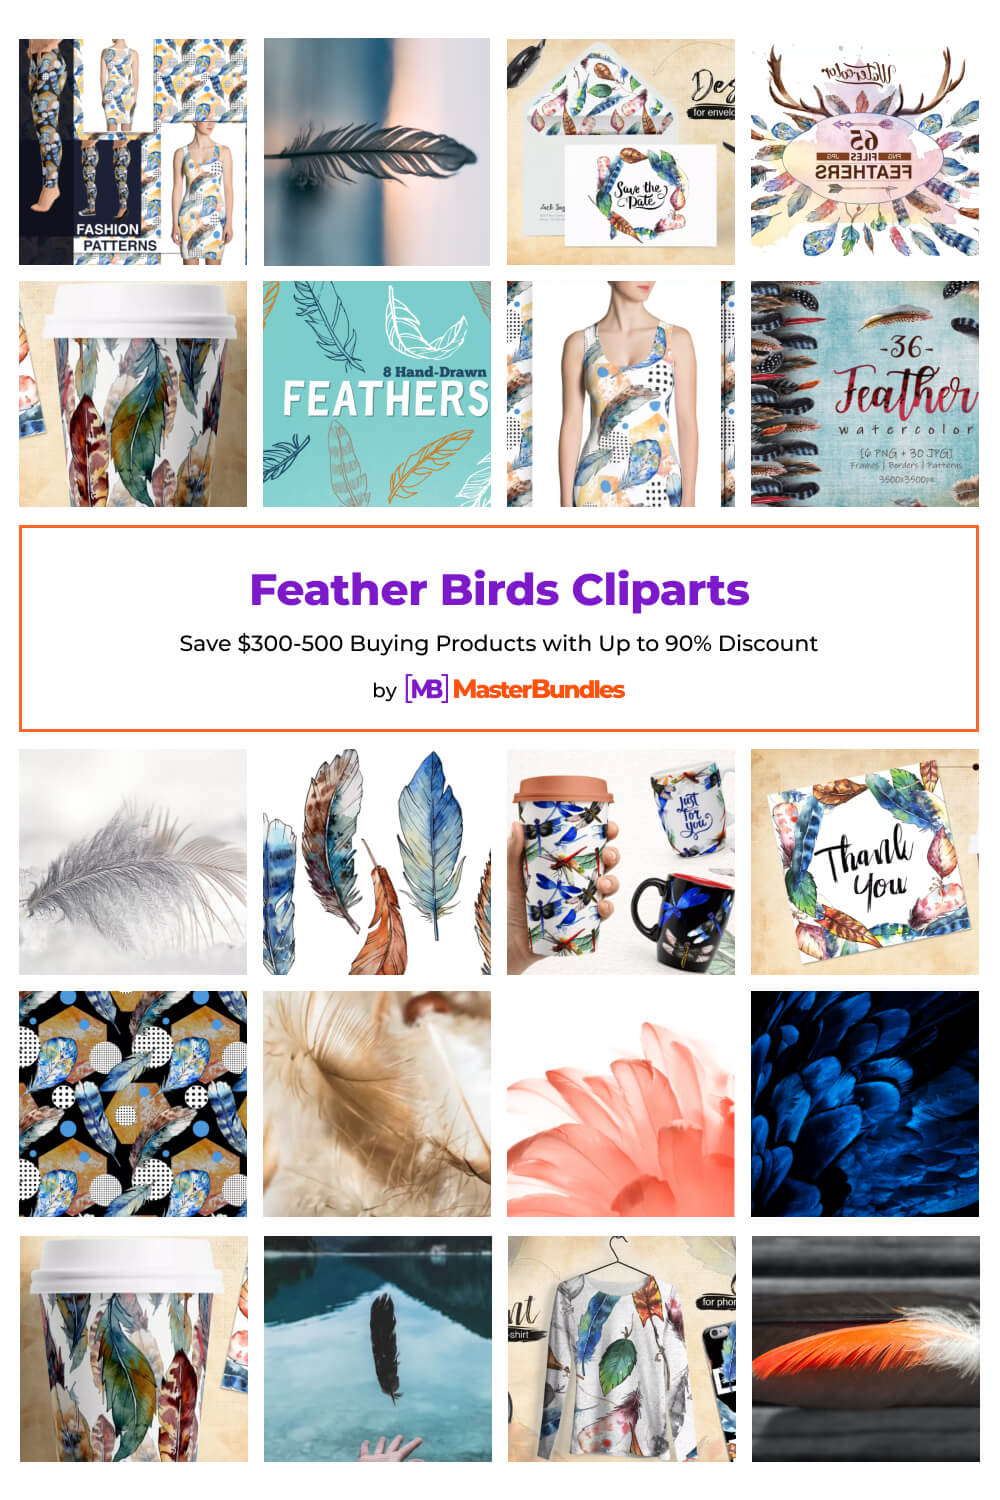 feather birds cliparts pinterest image.